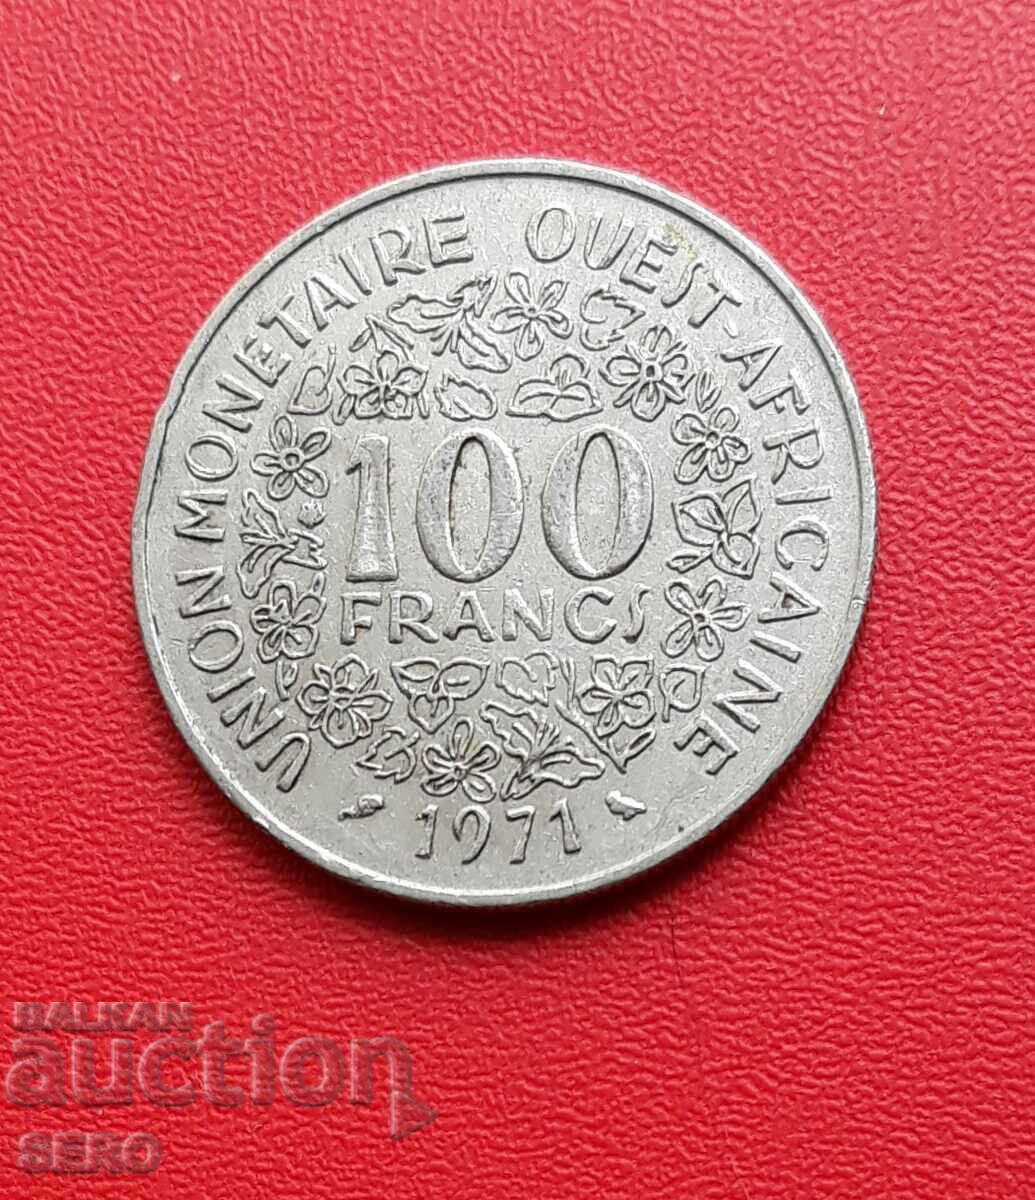 French West Africa-100 francs 1971